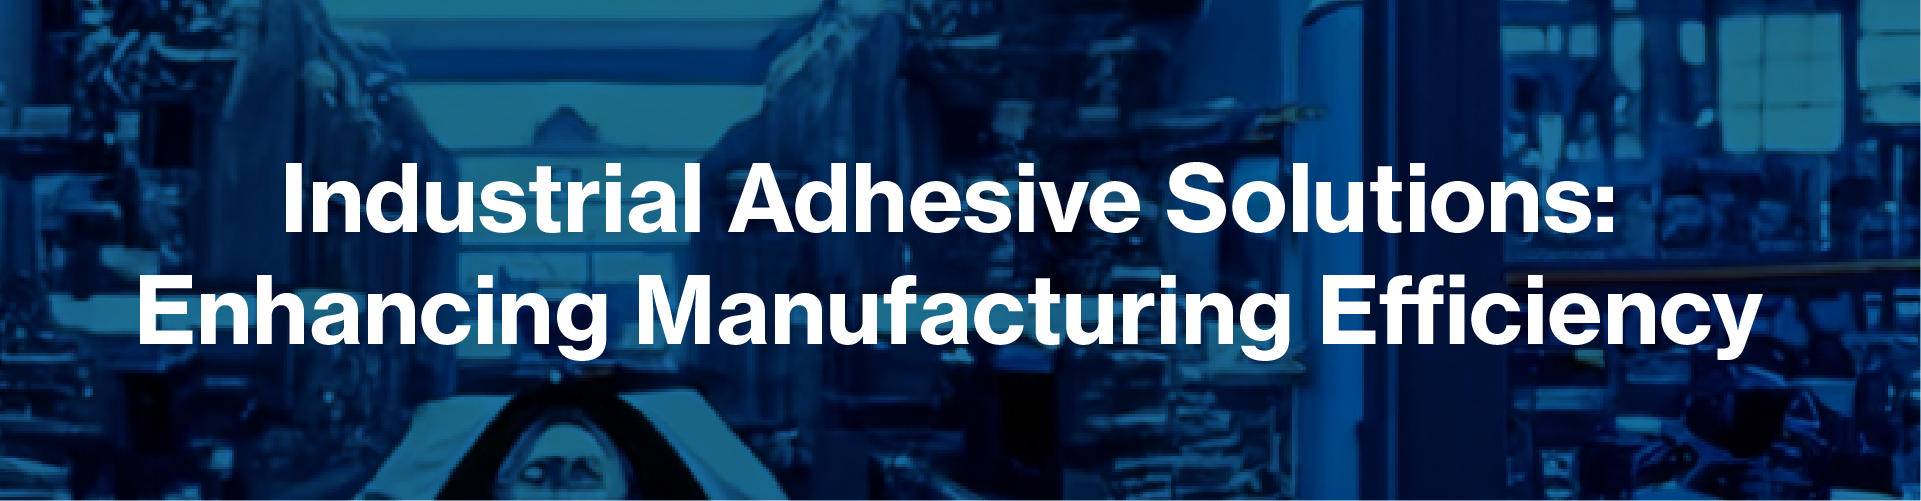 Industrial Adhesive Solutions Article Banner